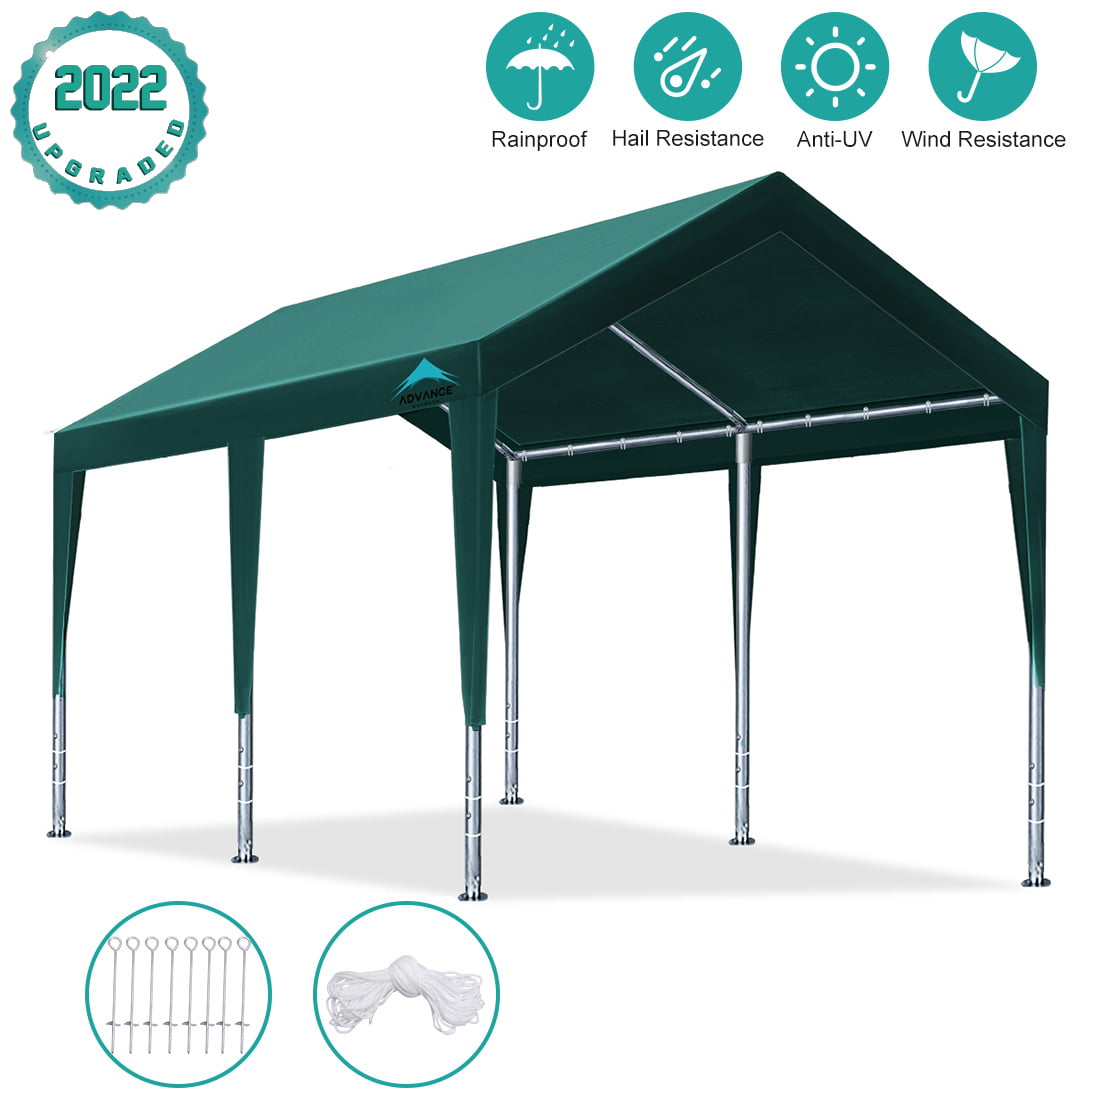 Details about   HEAVY DUTY Outdoor Canopy 10 x 20 Carport Car Boat Shelter Party Tent Anti UV 